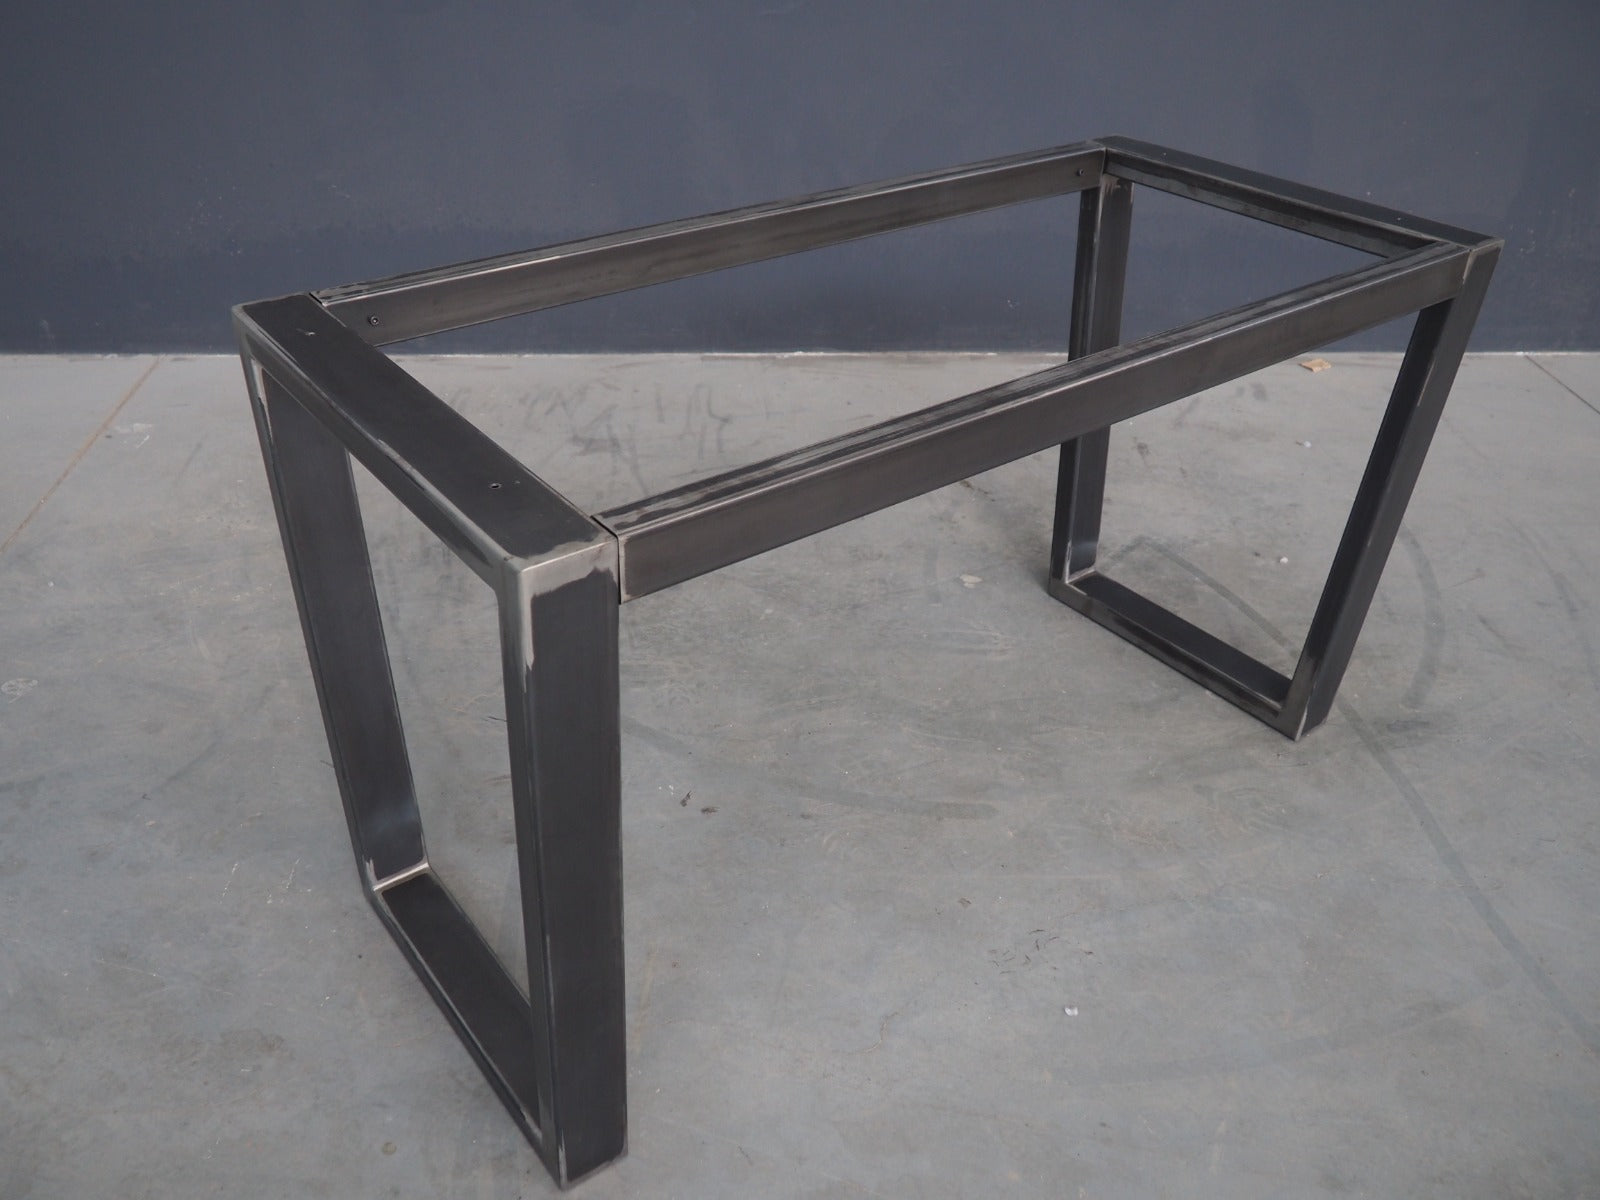 Trapezoid Frame Metal Dining Table Base , 28" H X 24" W x 52" L | TAPER 2452